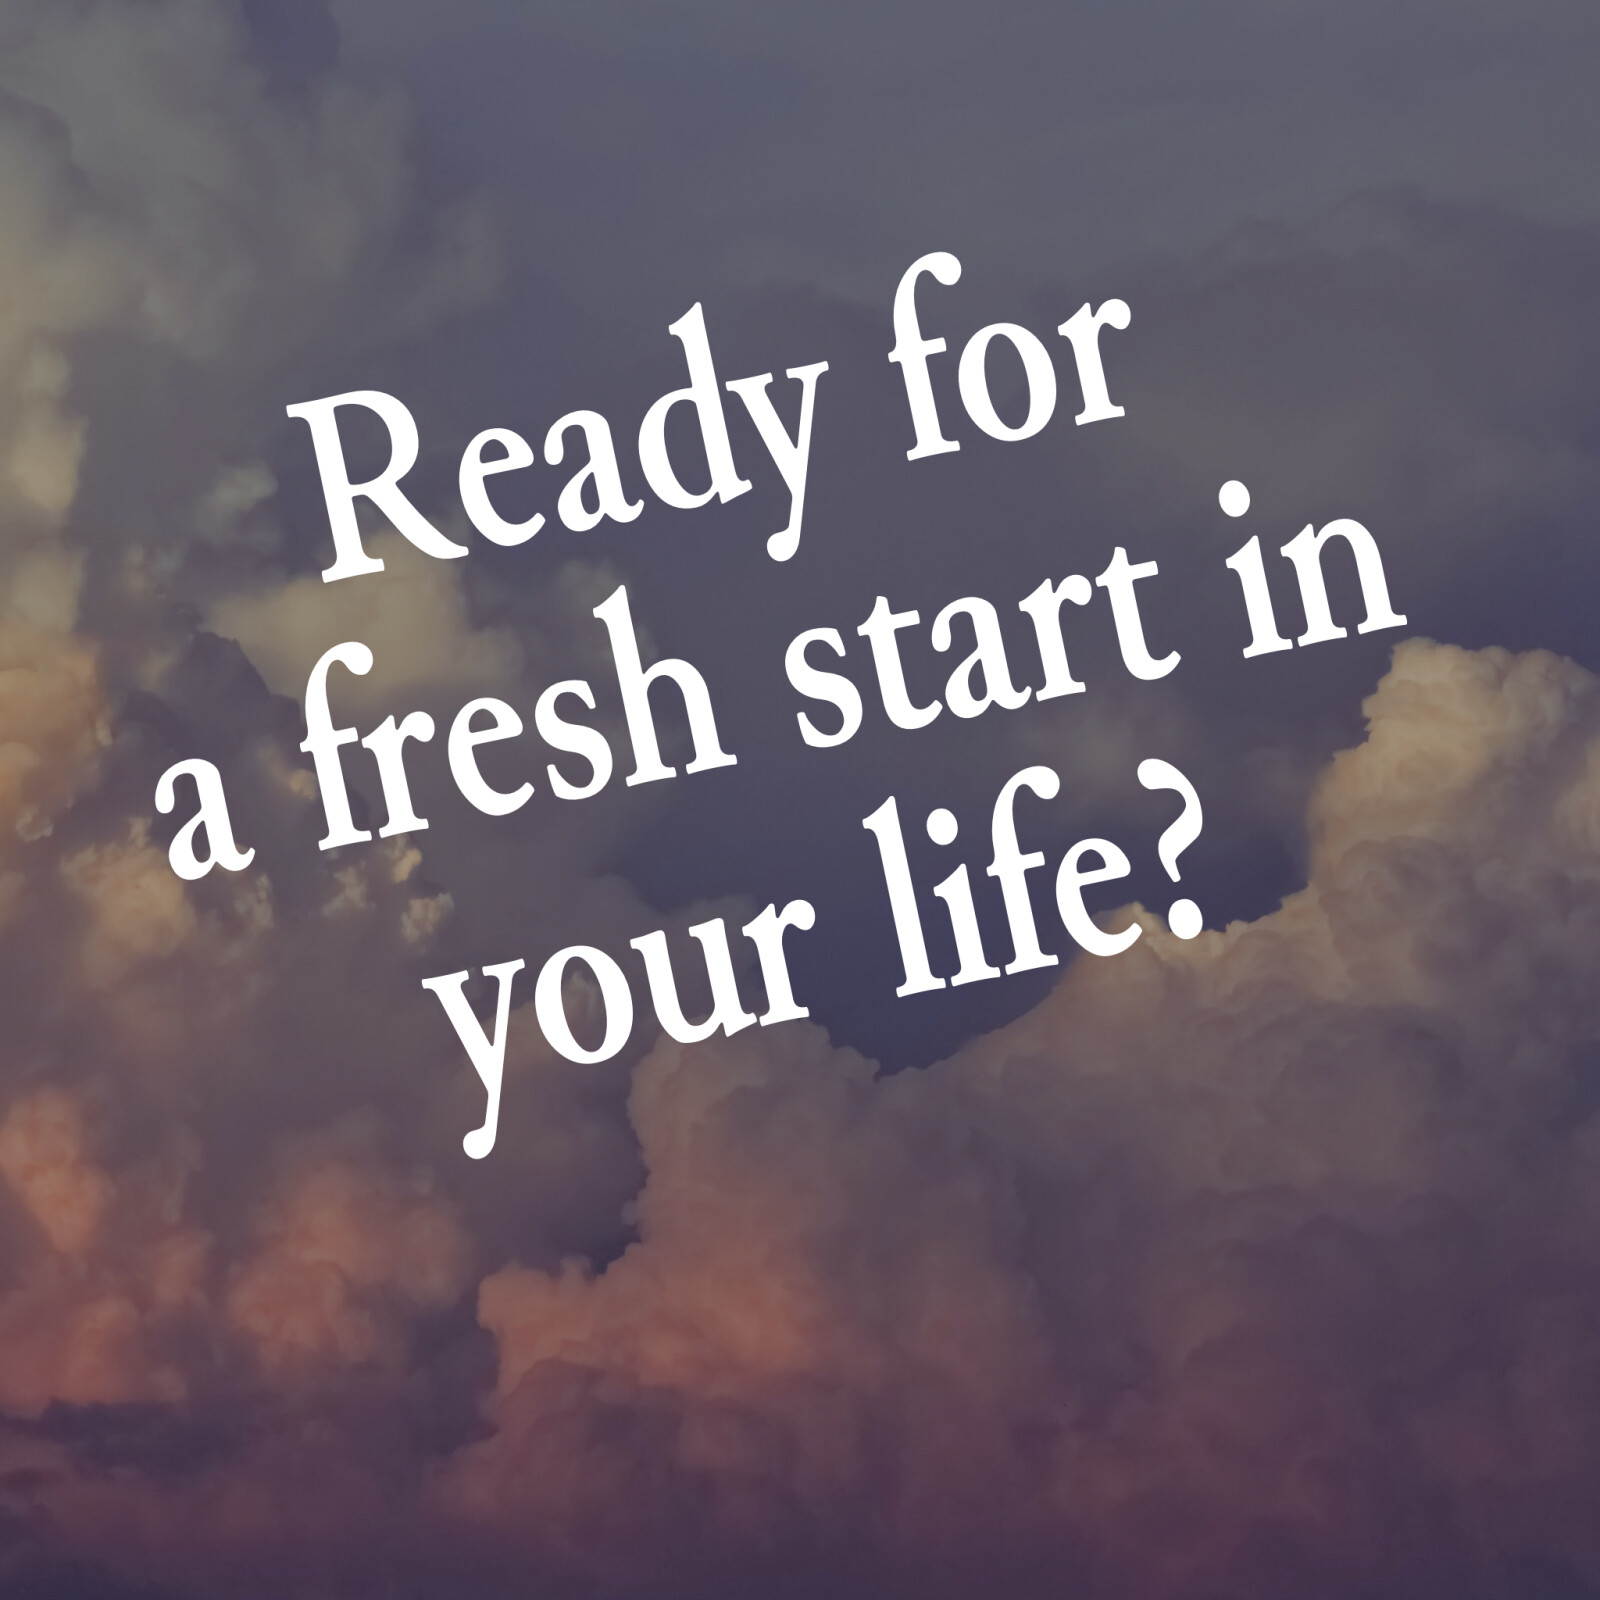 Ready for a FRESH START in life?